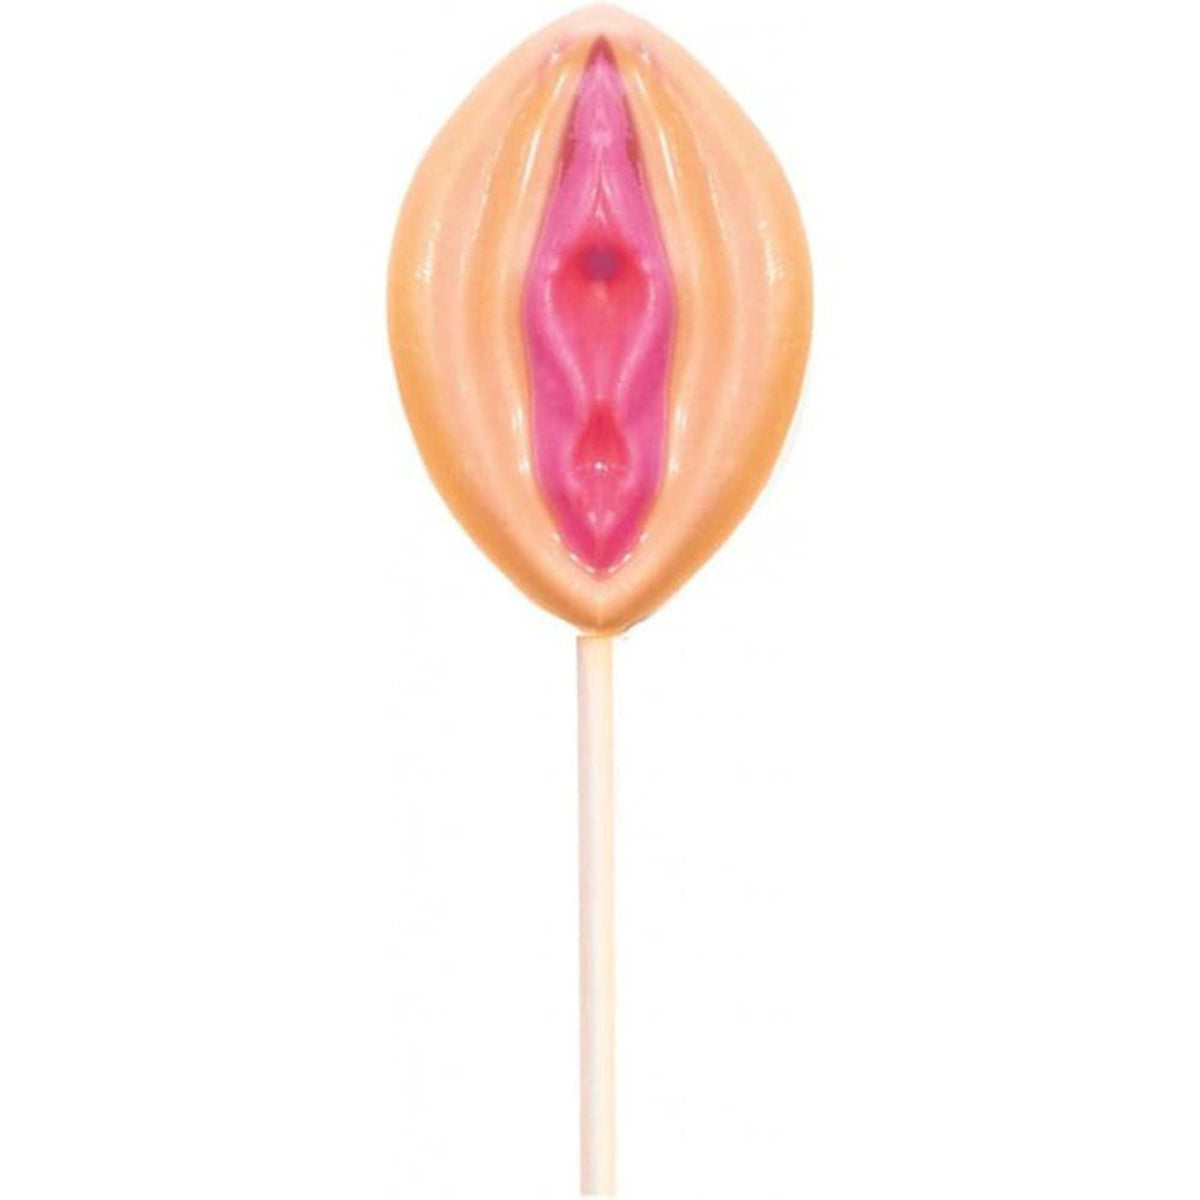 EP Product Canada INC. Bachelorette Bachelorette Party Strawberry Pussy Lickers Pop, 1 Count